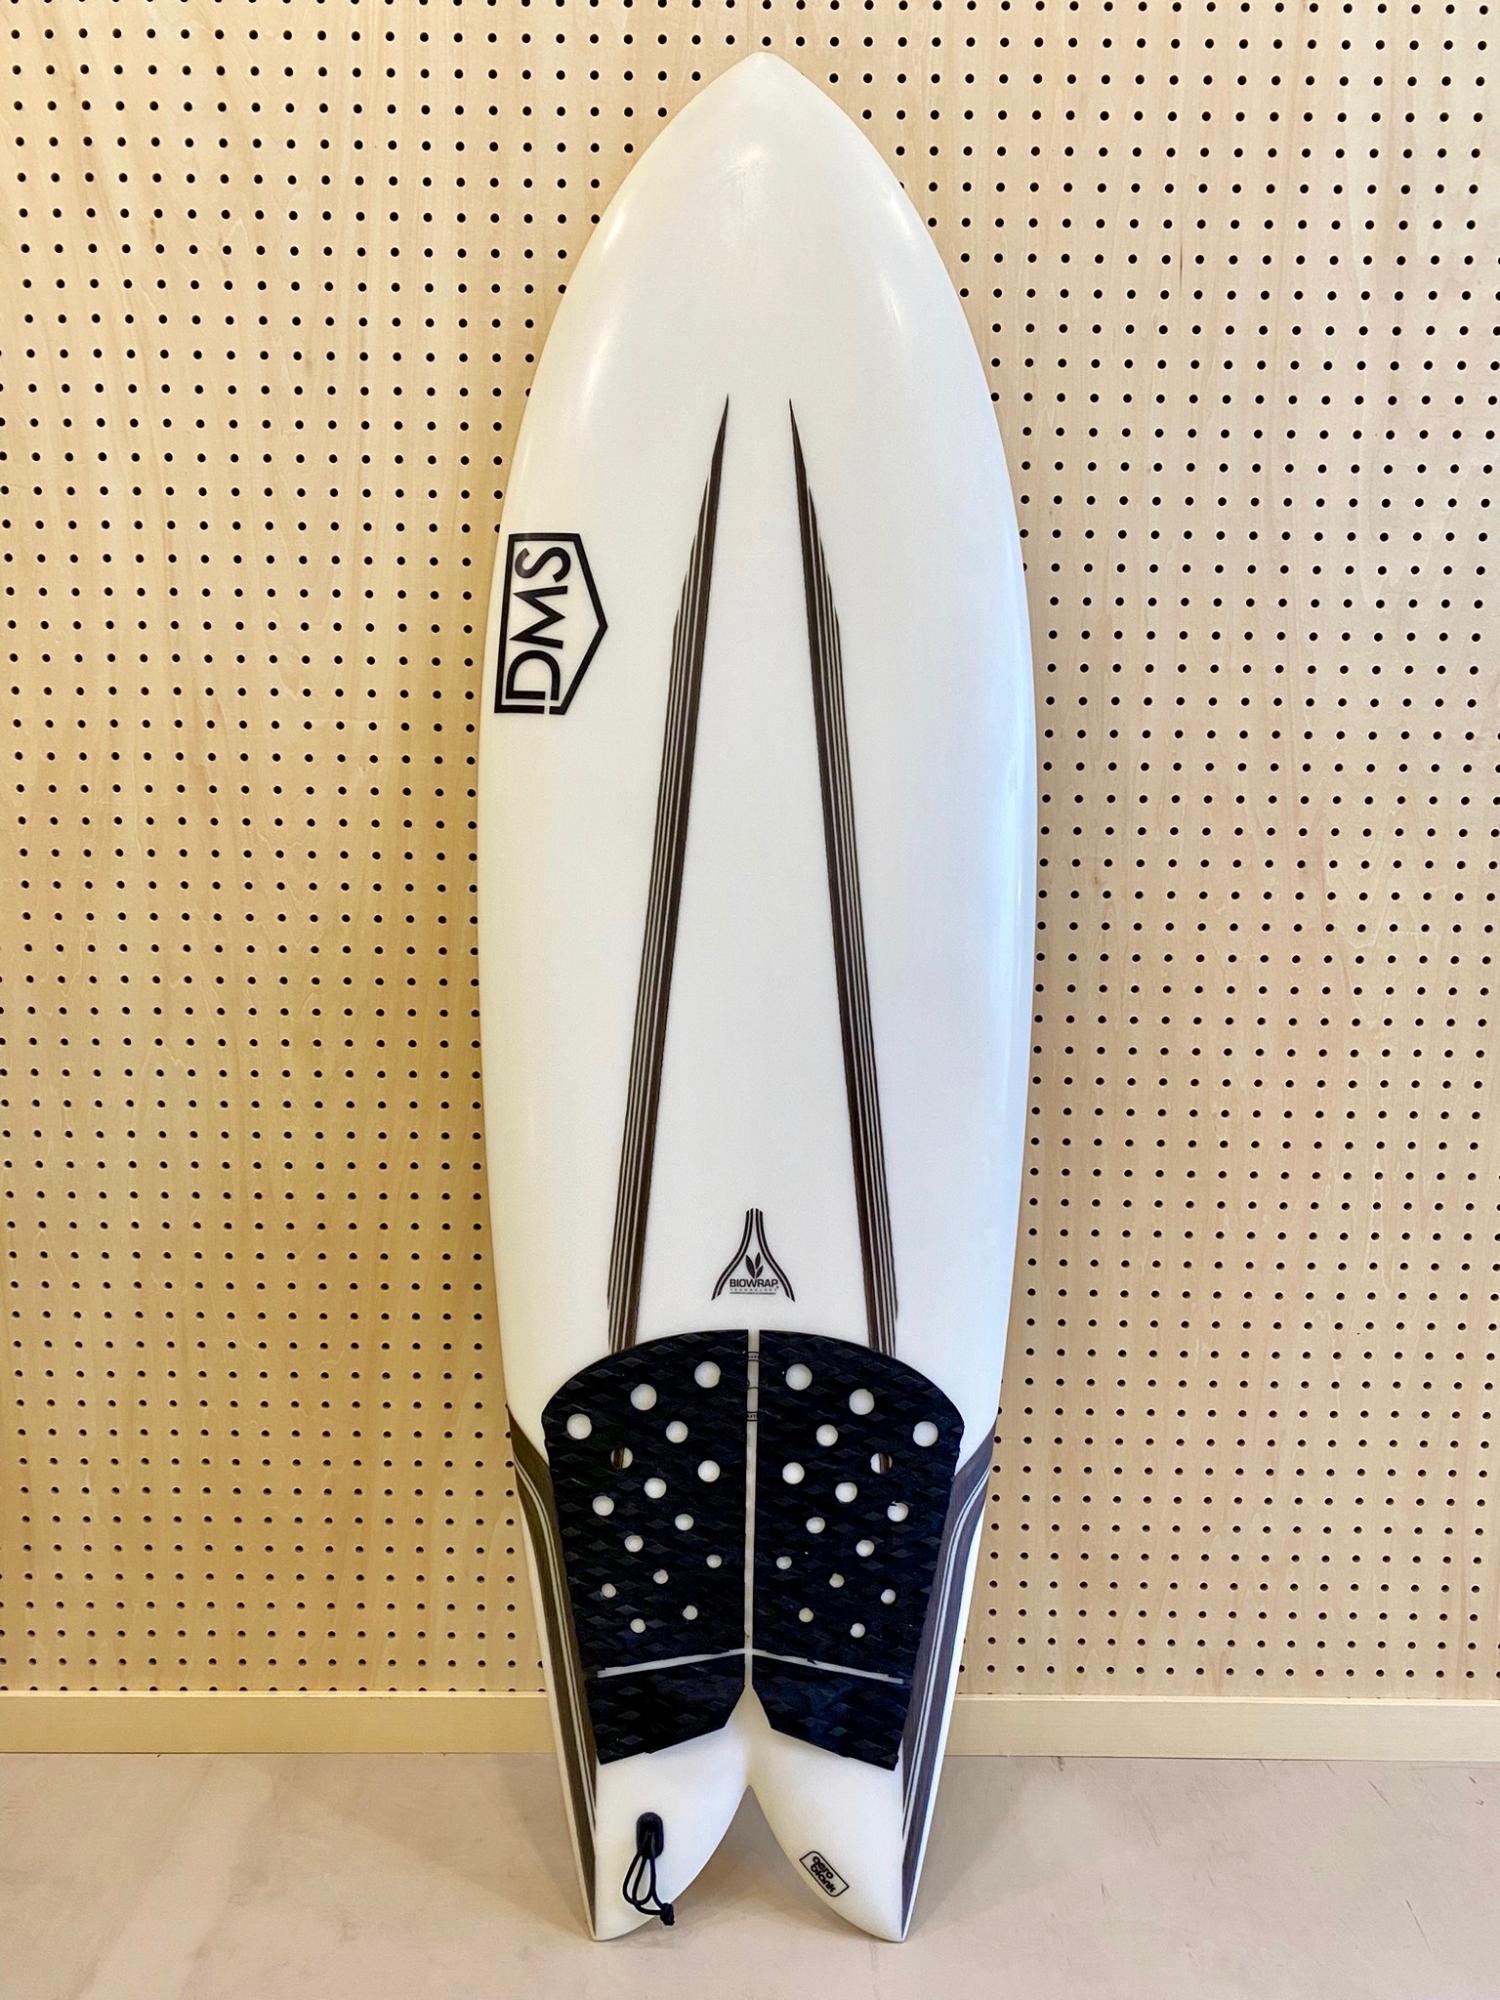 USED BOARDS (DMS Surfboards Charger 5.4)